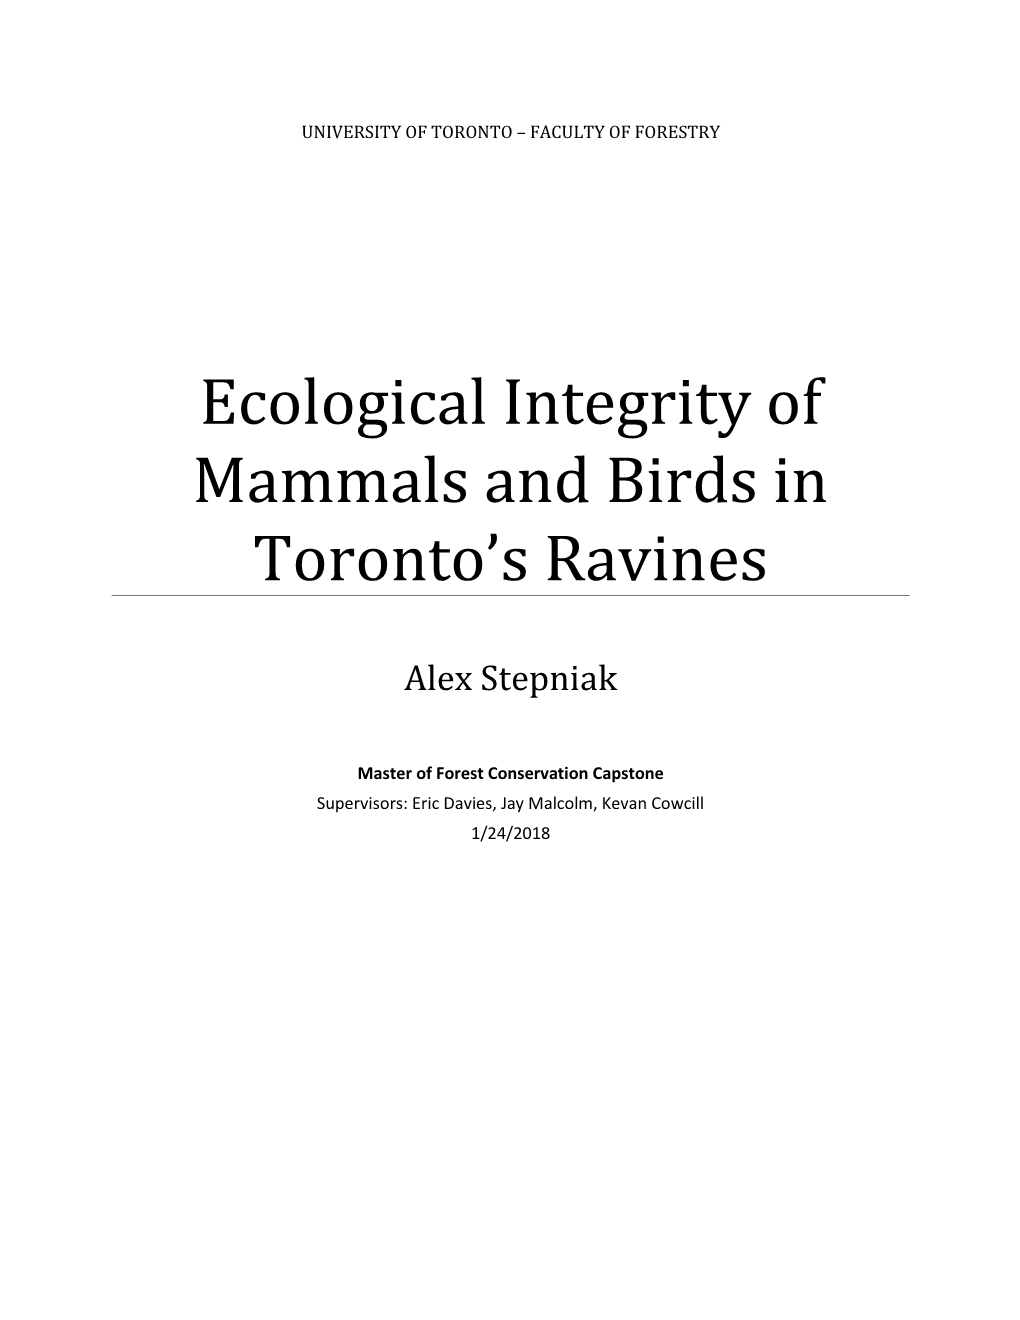 Ecological Integrity of Mammals and Birds in Toronto's Ravines